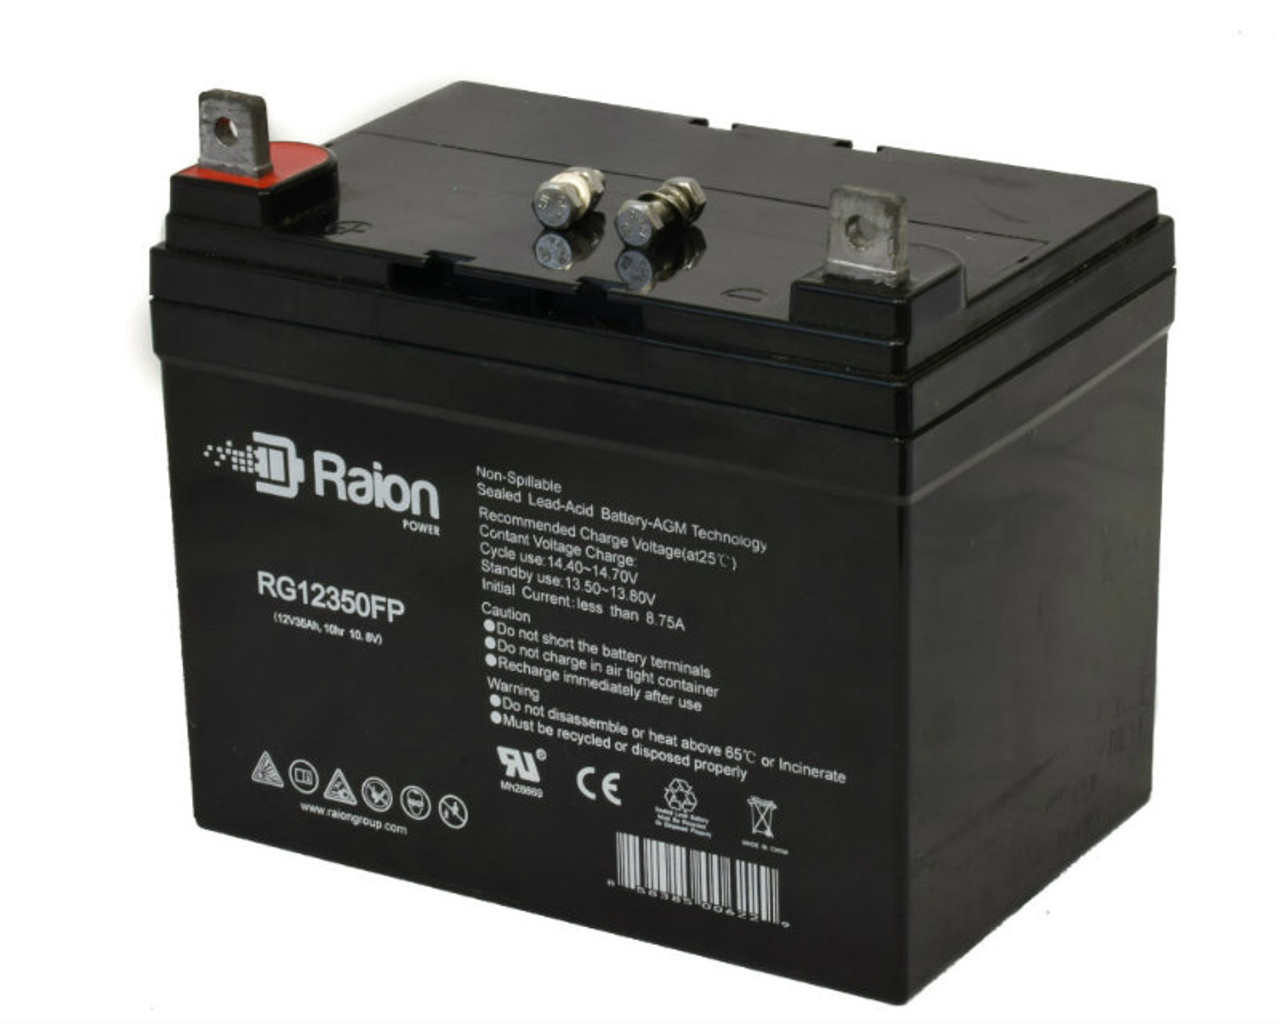 Raion Power Replacement 12V 35Ah RG12350FP Battery for Dixon 6601